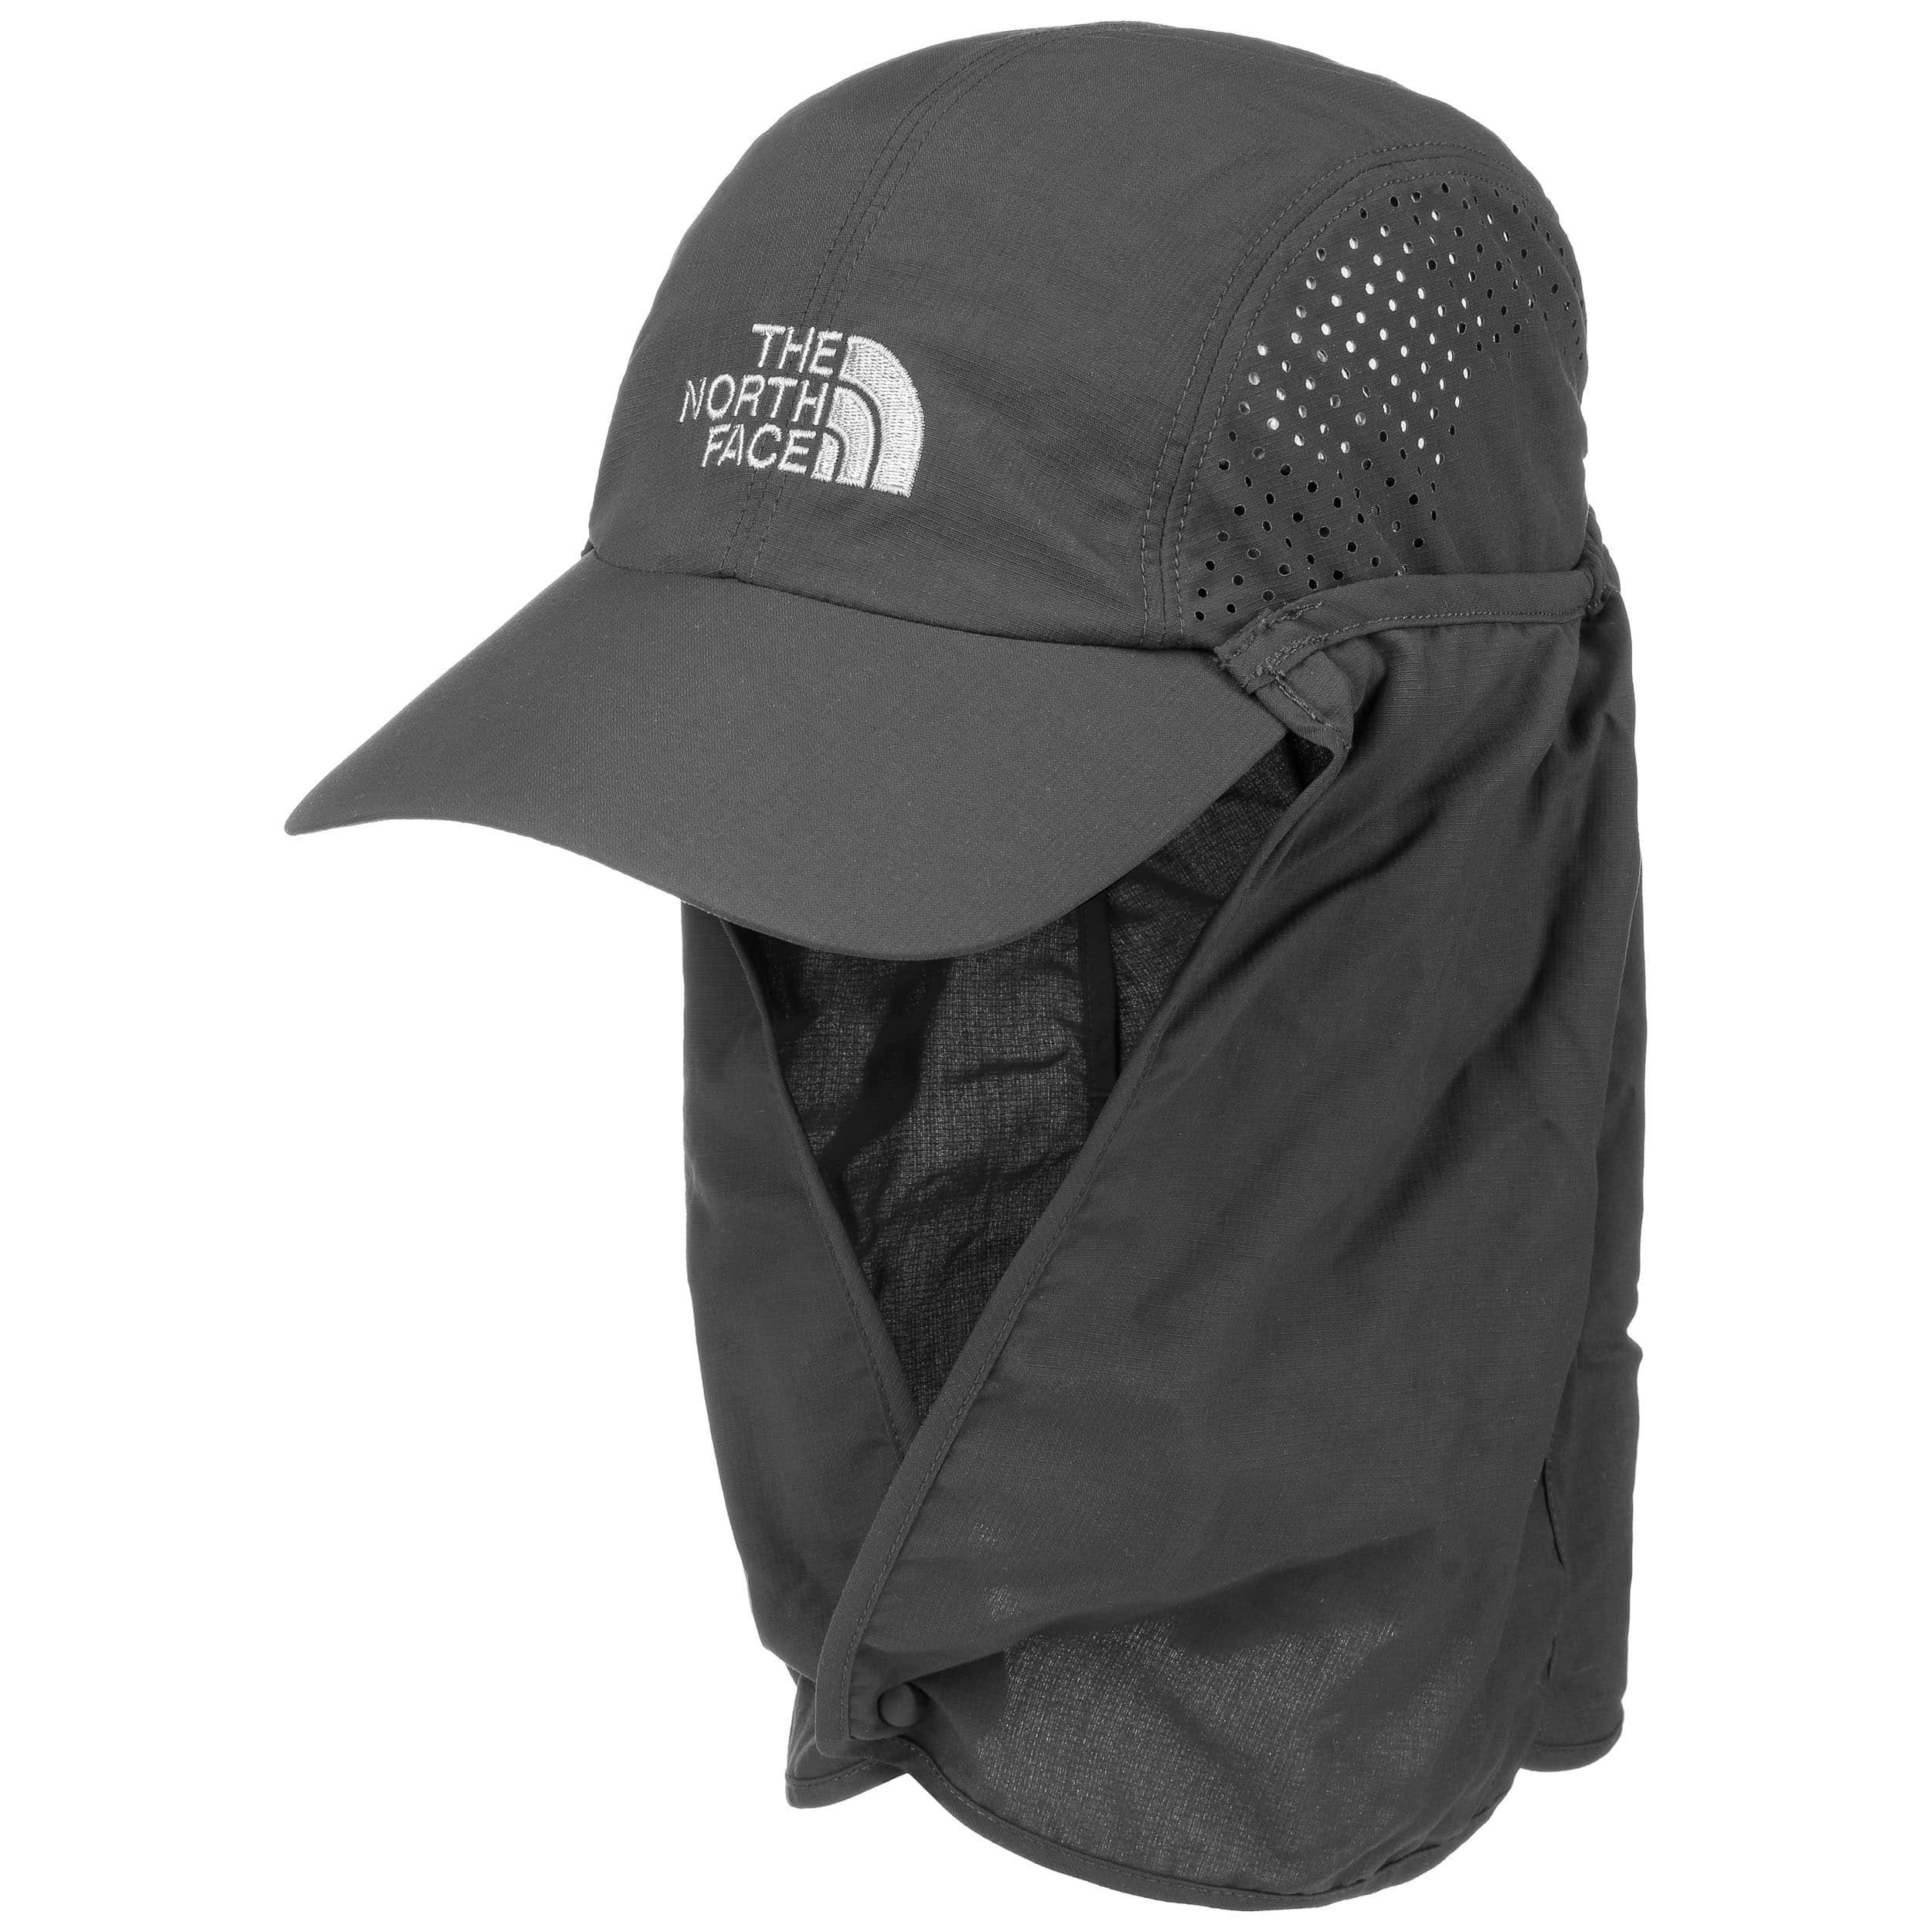 Sun Shield Cap by The North Face